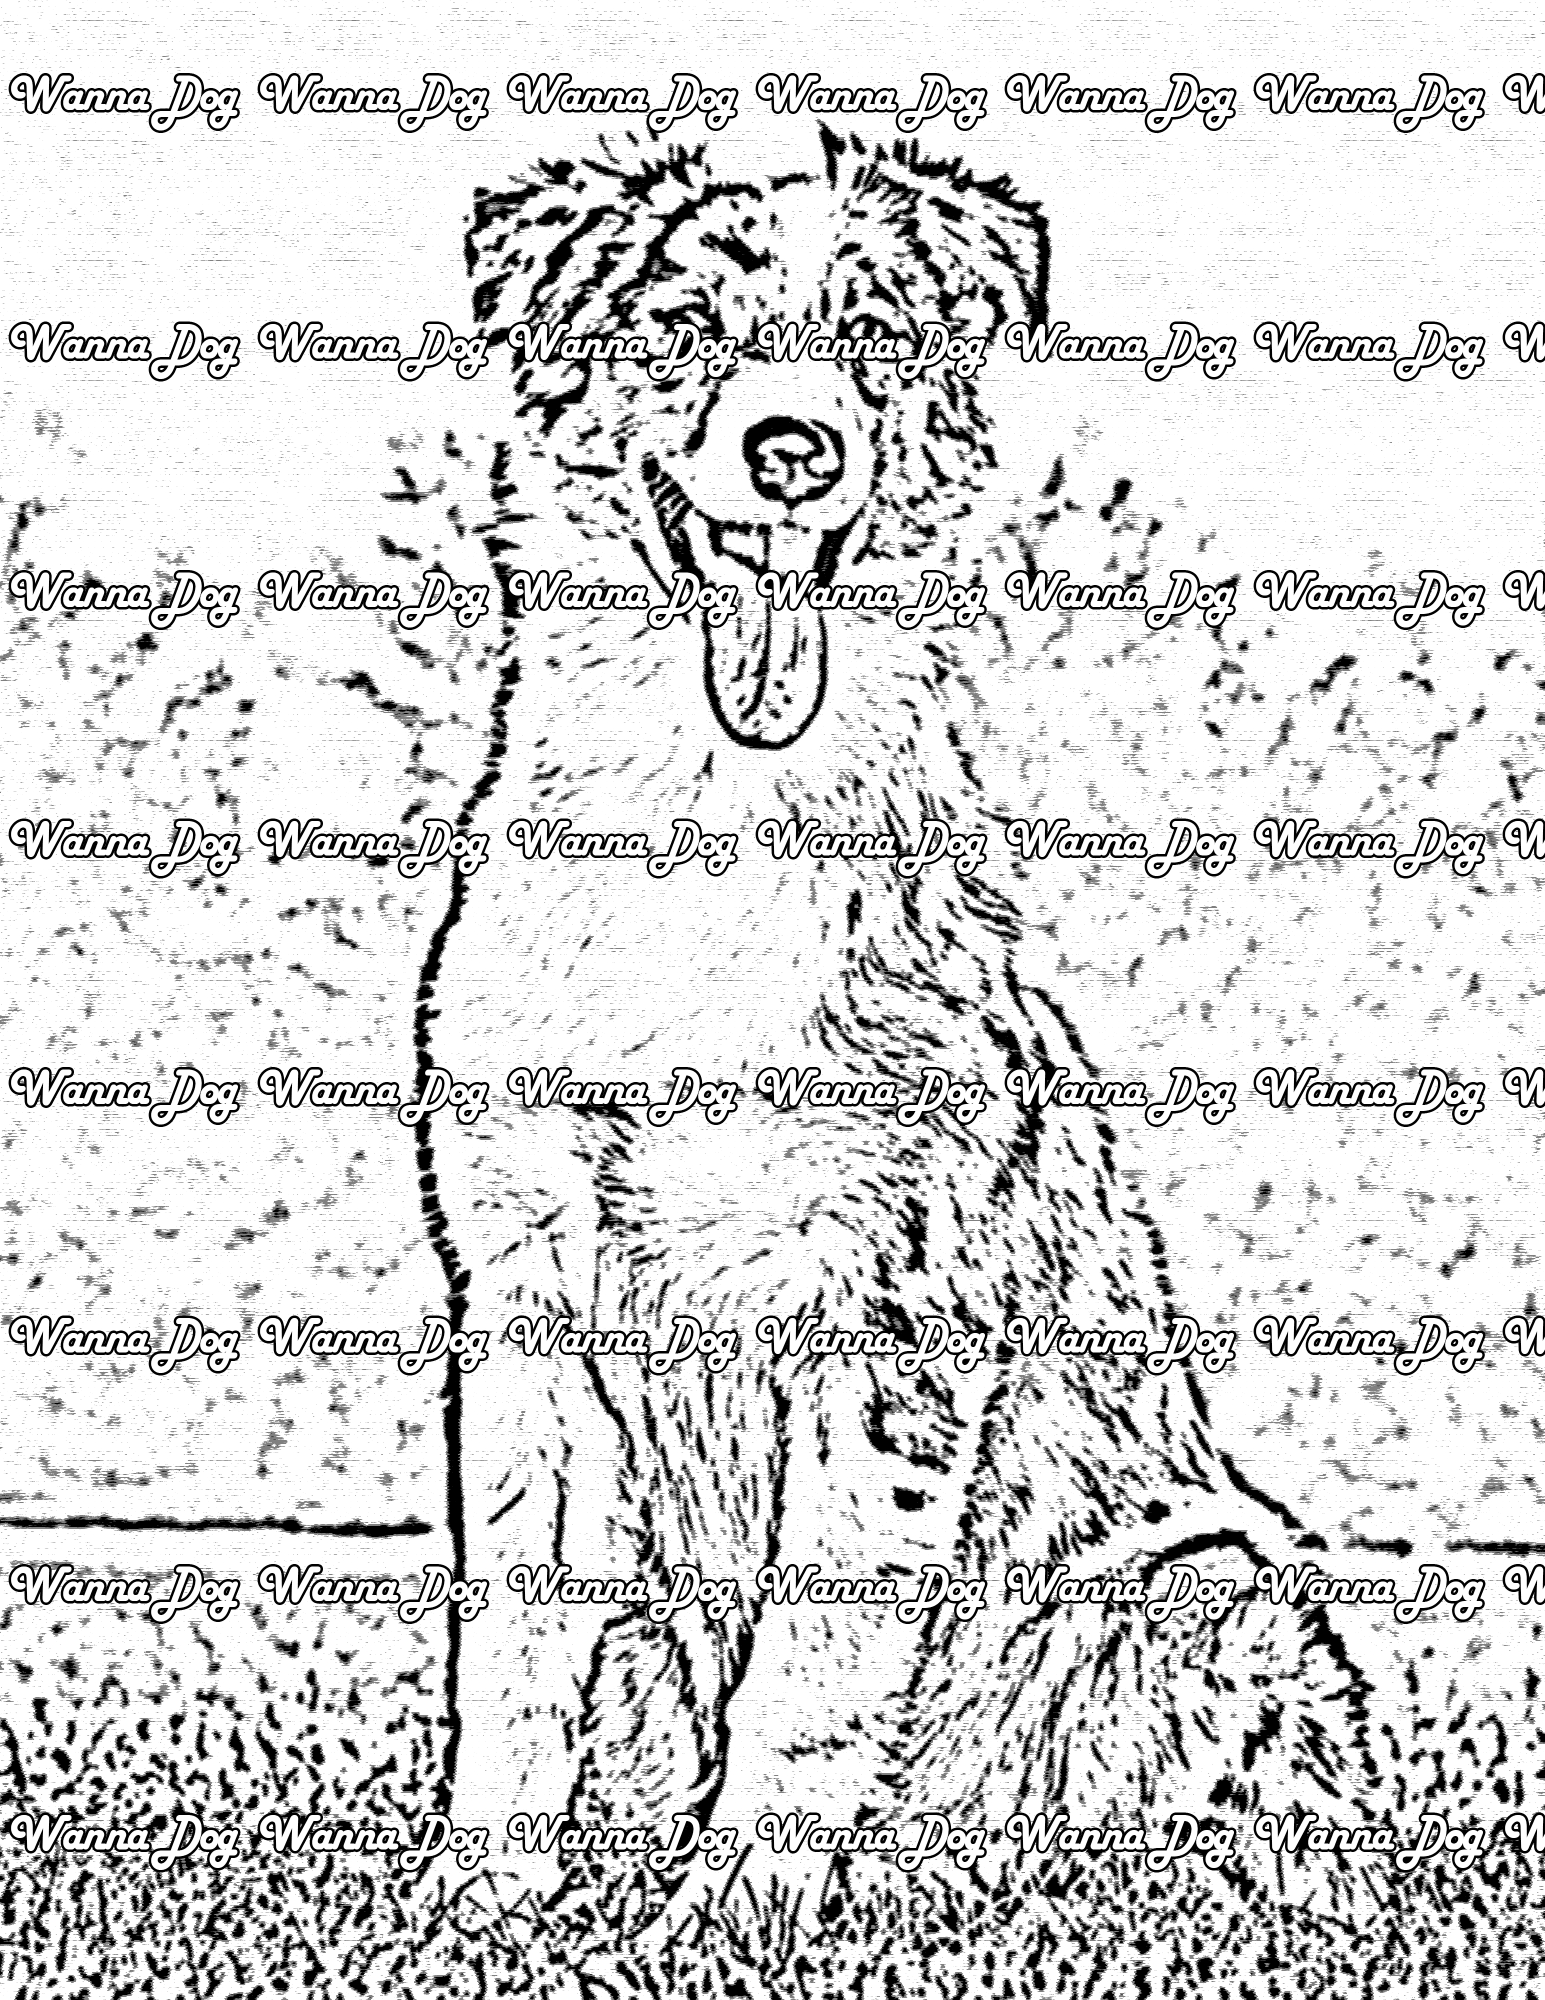 Australian Shepherd Coloring Page of a Australian Shepherd in grass, standing around with their tongue out